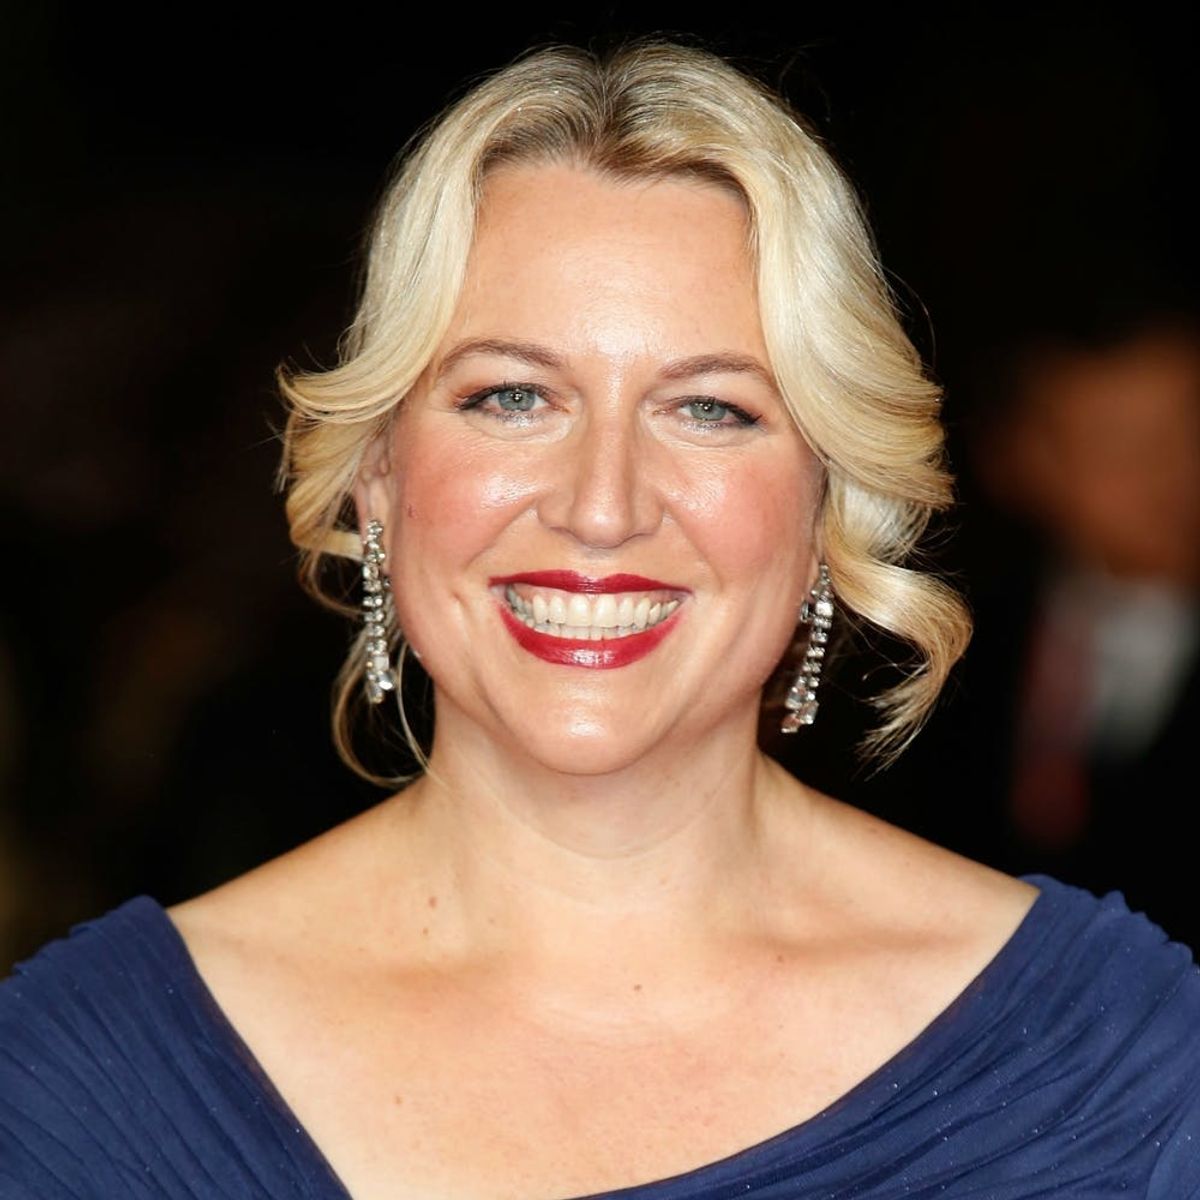 Wild Author Cheryl Strayed’s Sweet Story About Watching Gilmore Girls With Her Daughter Will Have You Misty-Eyed